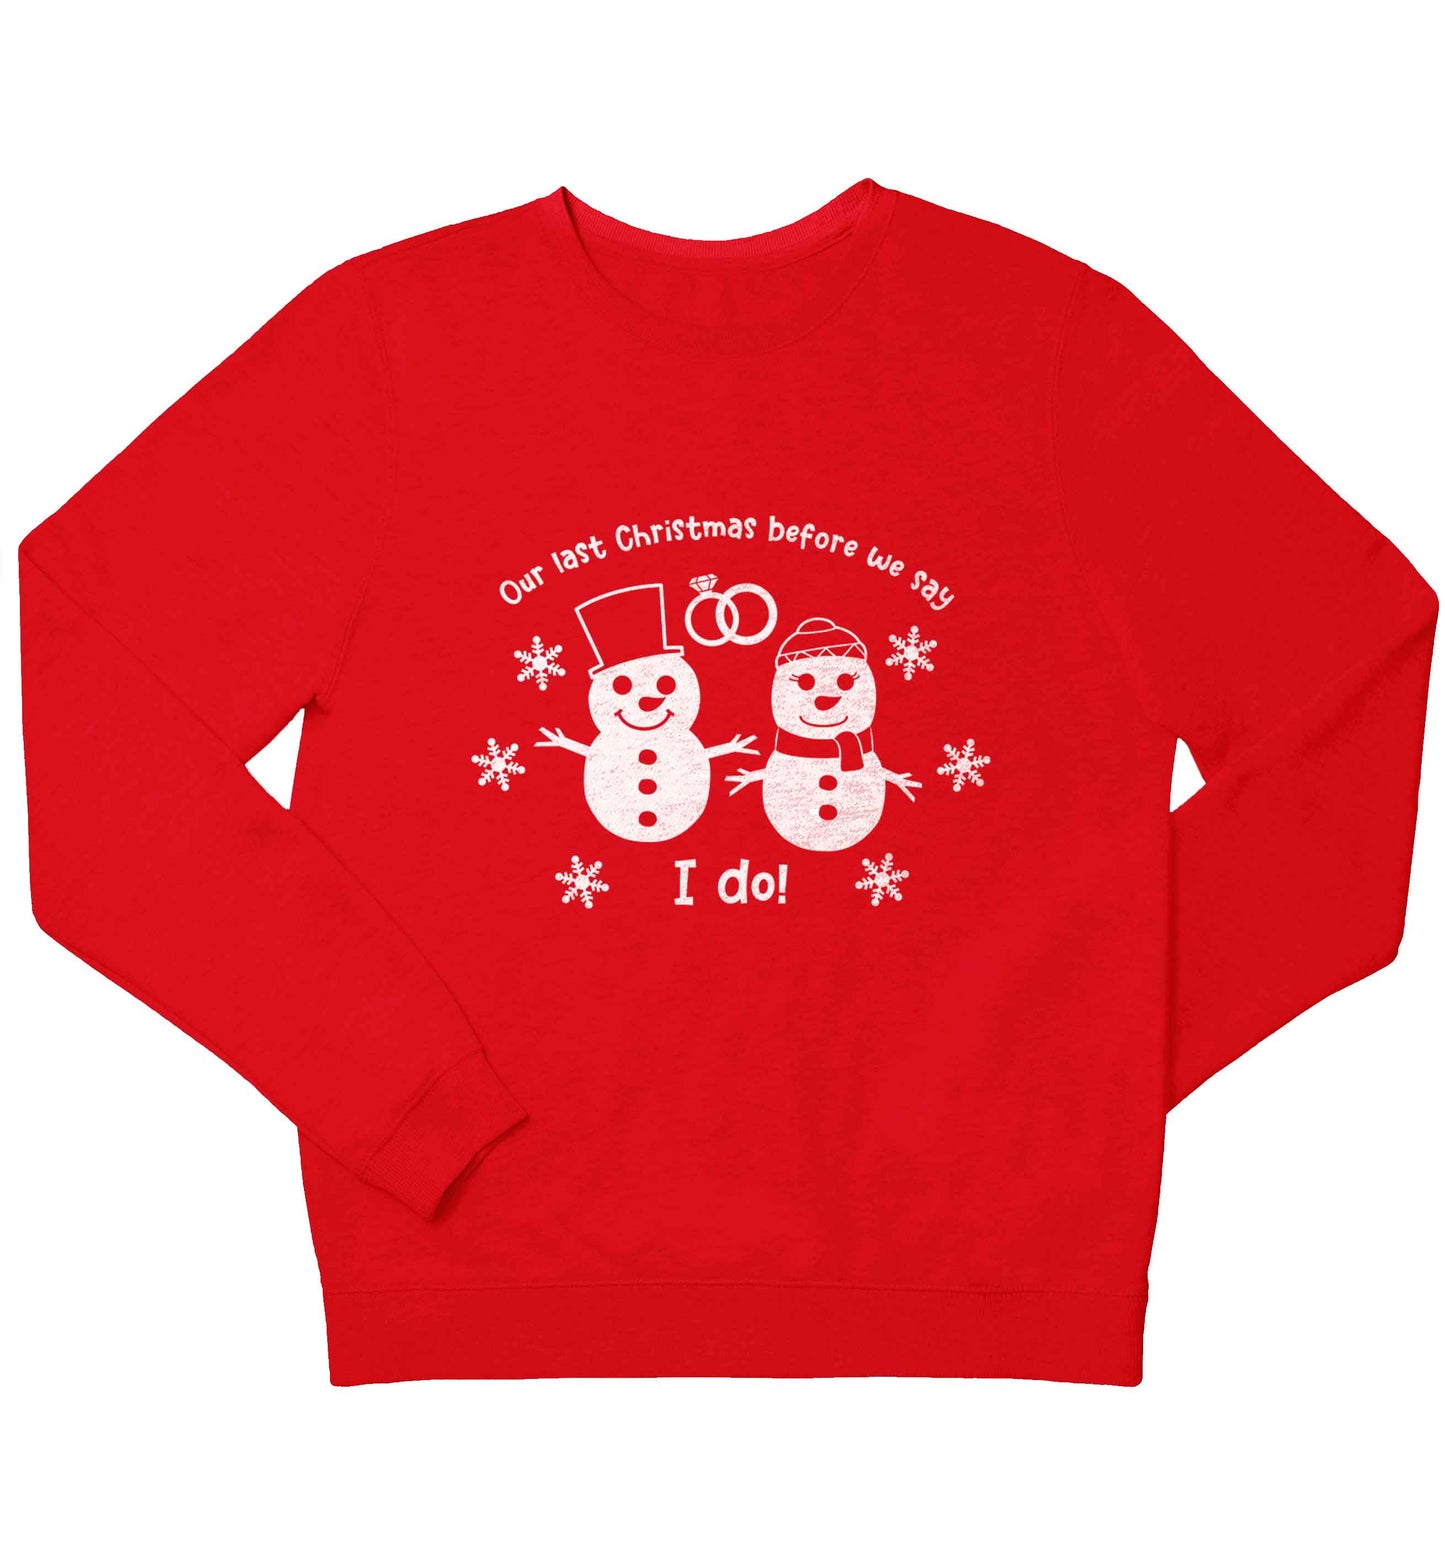 Last Christmas before we say I do children's grey sweater 12-13 Years